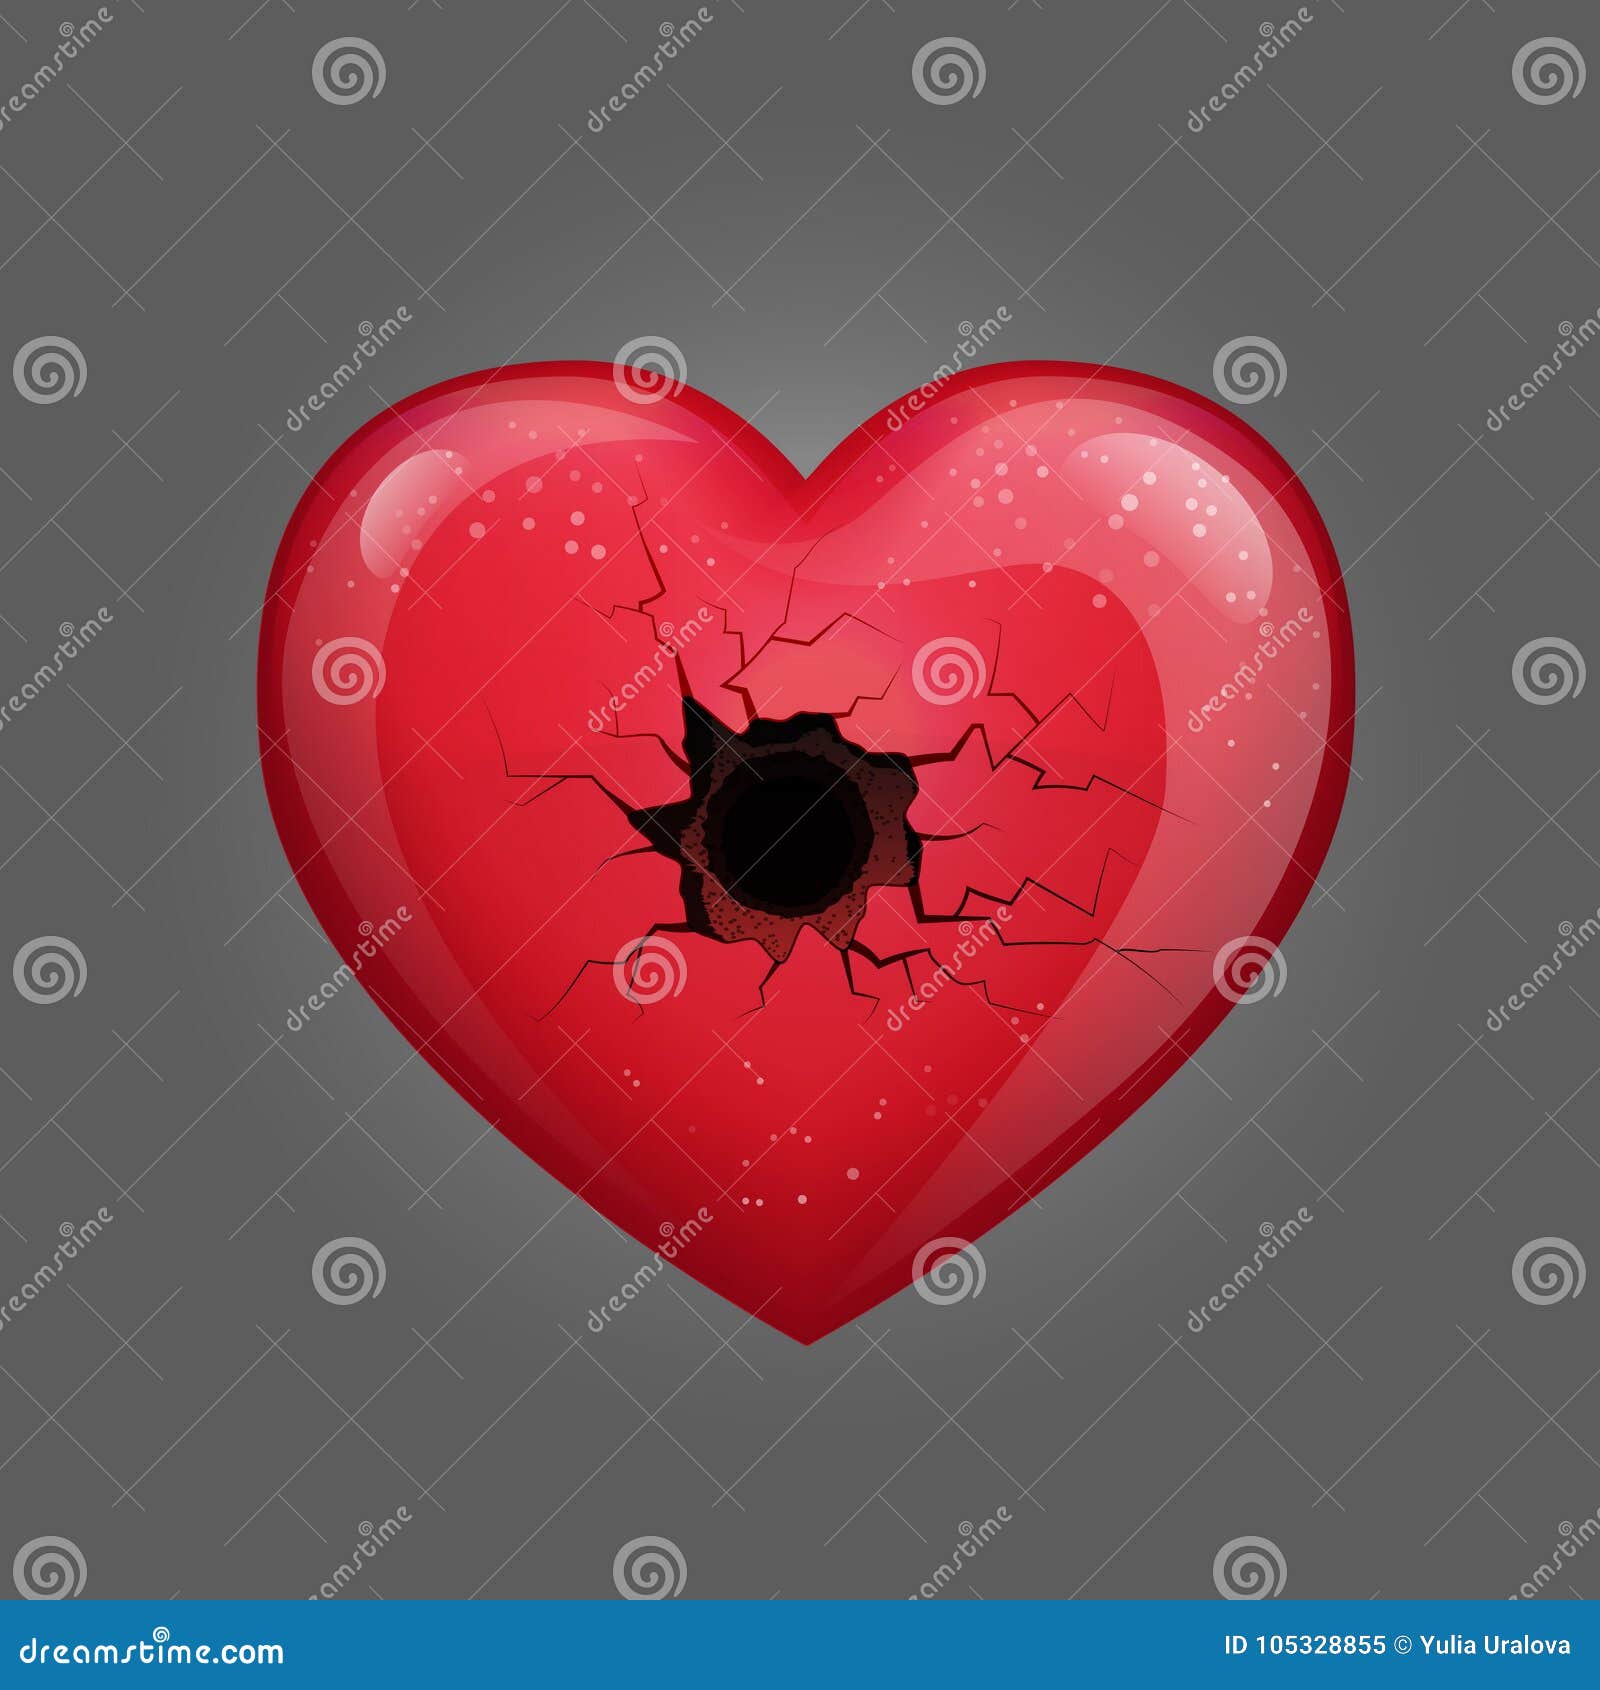 Beautiful red glossy heart shape Royalty Free Vector Image